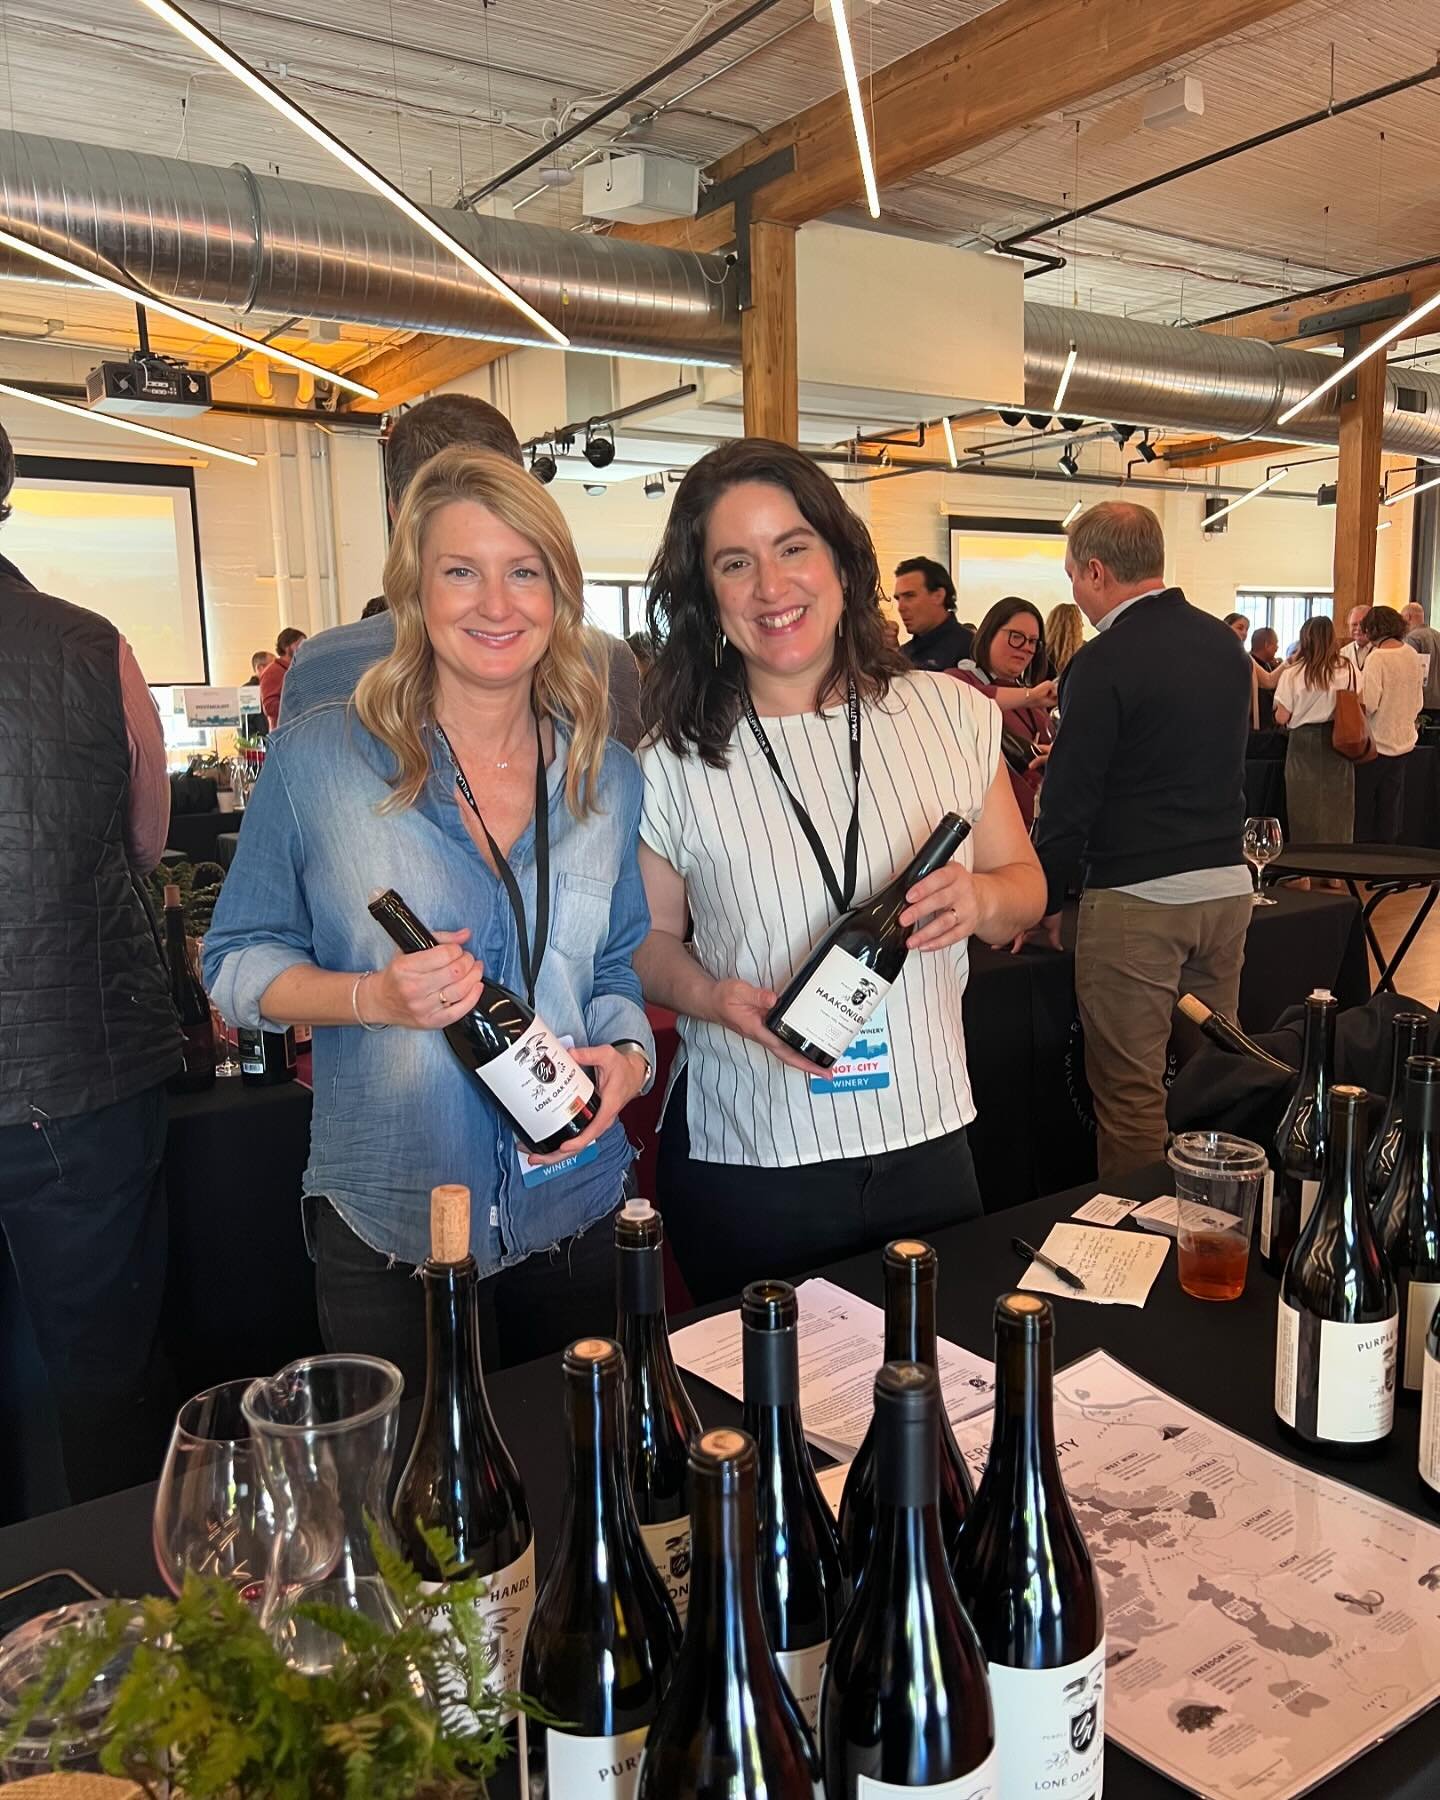 Marque and Margaux pouring @purple.hands.winery at Pinot In the City Seattle.
 
#seattle #pnw #pnwwonderland #city #pinotinthecity #oregon #washington 
#winetasting #winery #purplehandswinery #2022vintage